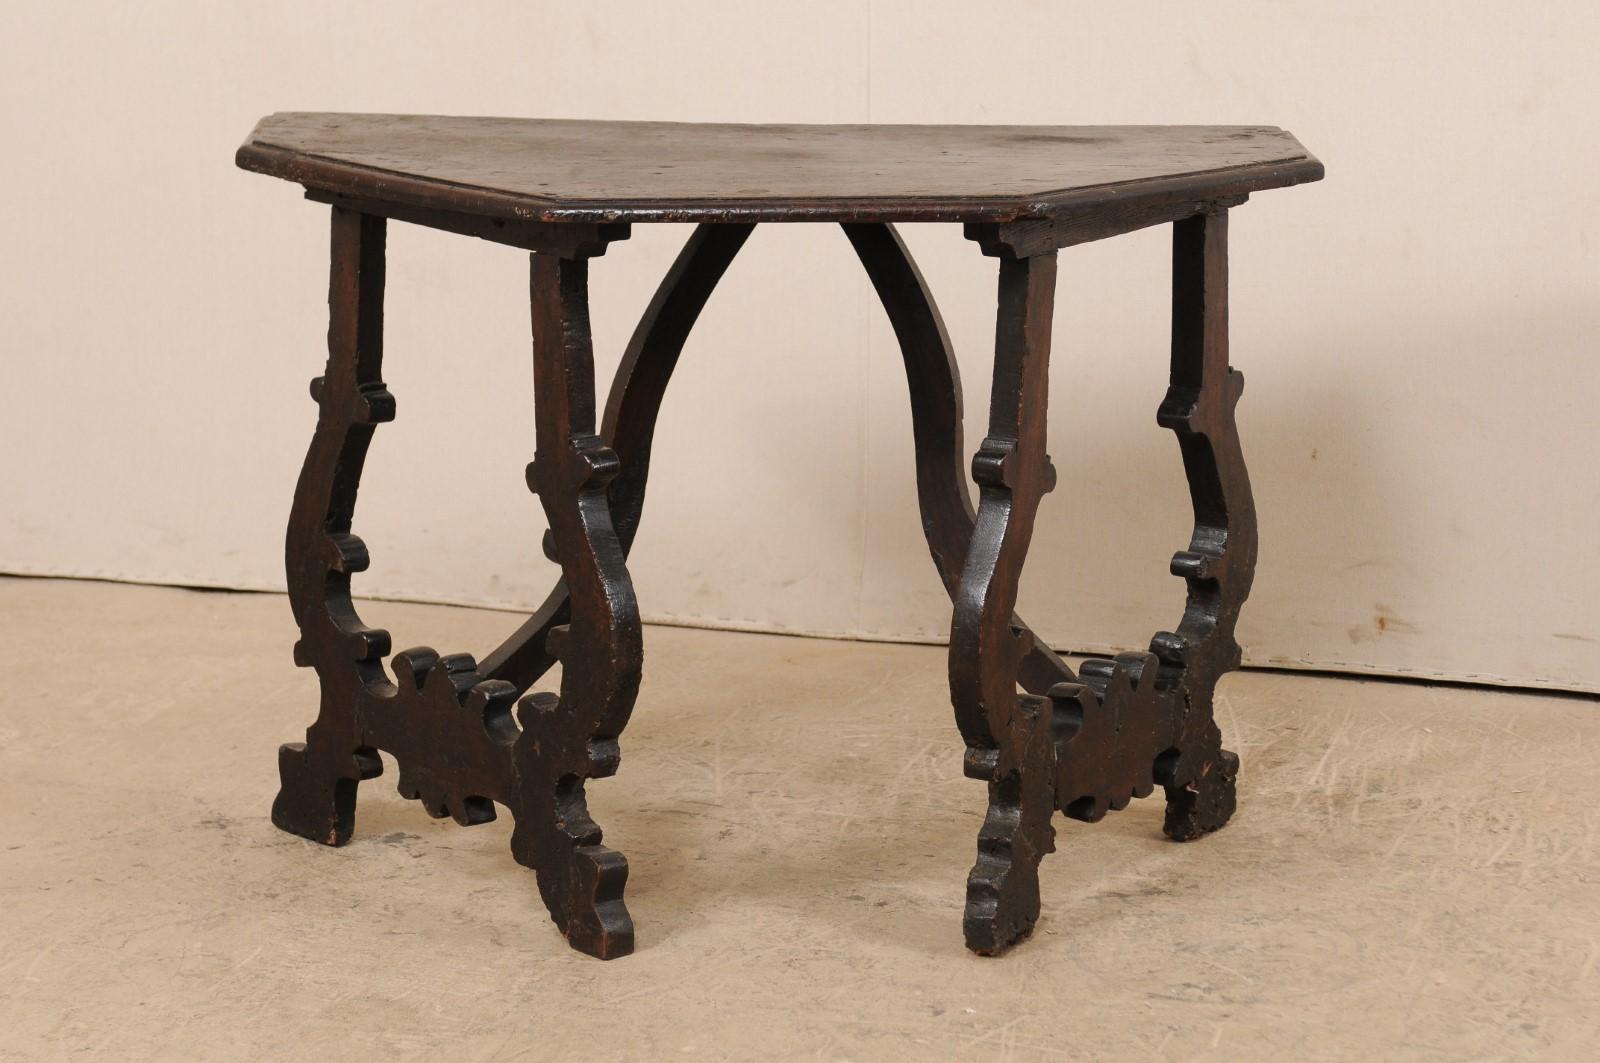 An Italian walnut table from the turn of the 17th-18th century. This antique table from Italy features a demi-style halved-octagon shaped top which is raised upon a pair of sinuously carved and canted lyre-legs. The lyre legs are braced with two